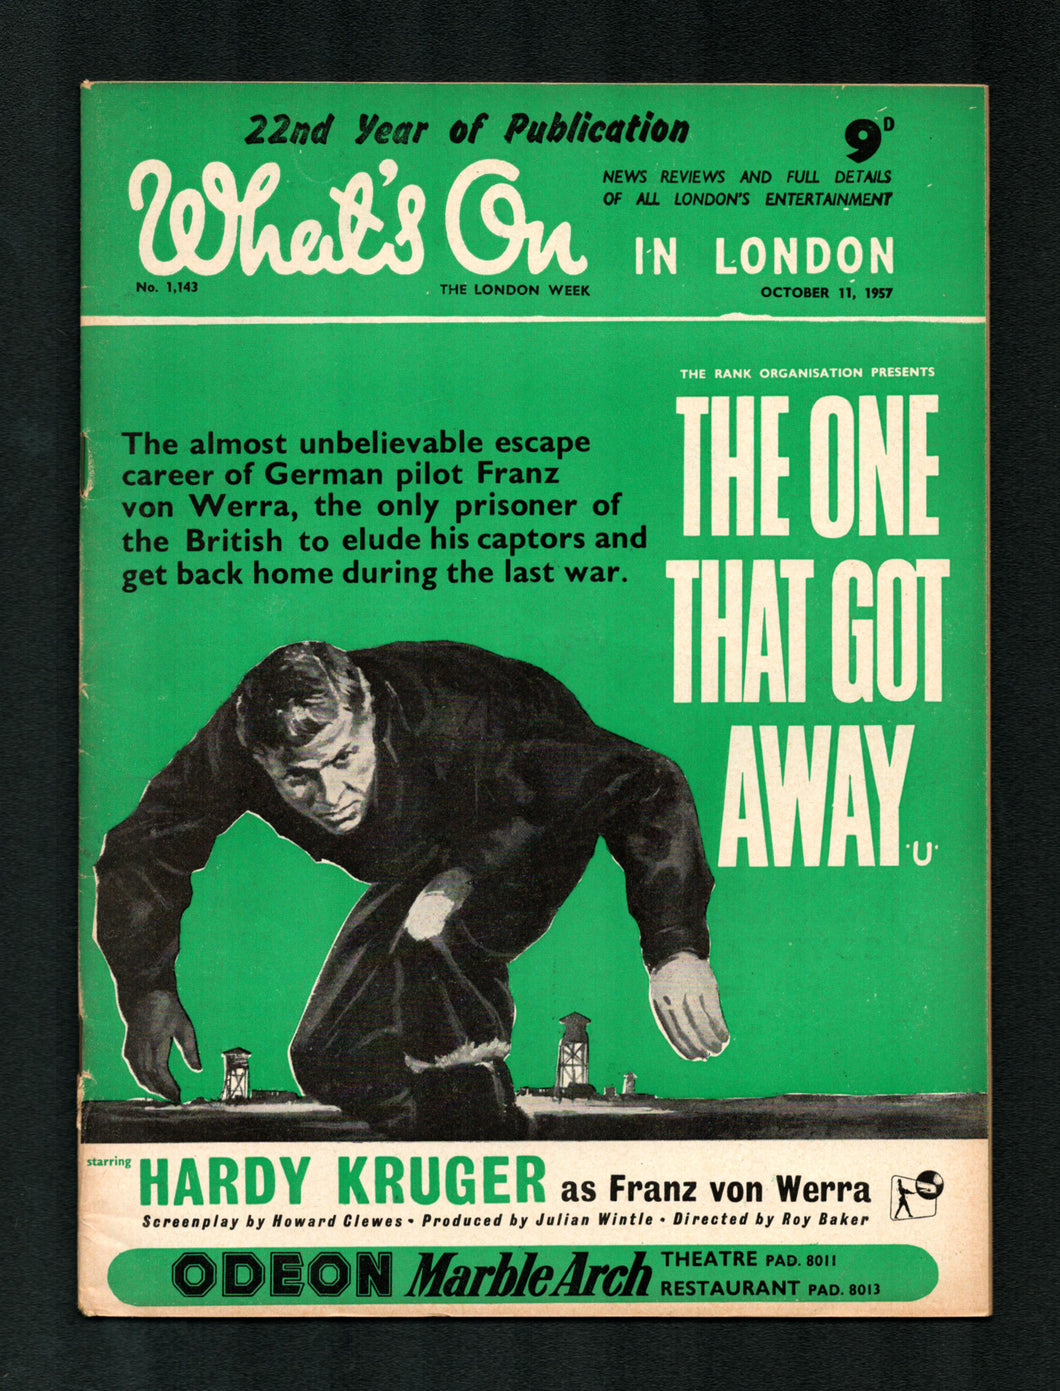 Whats on in London No 1143 Oct 11 1957